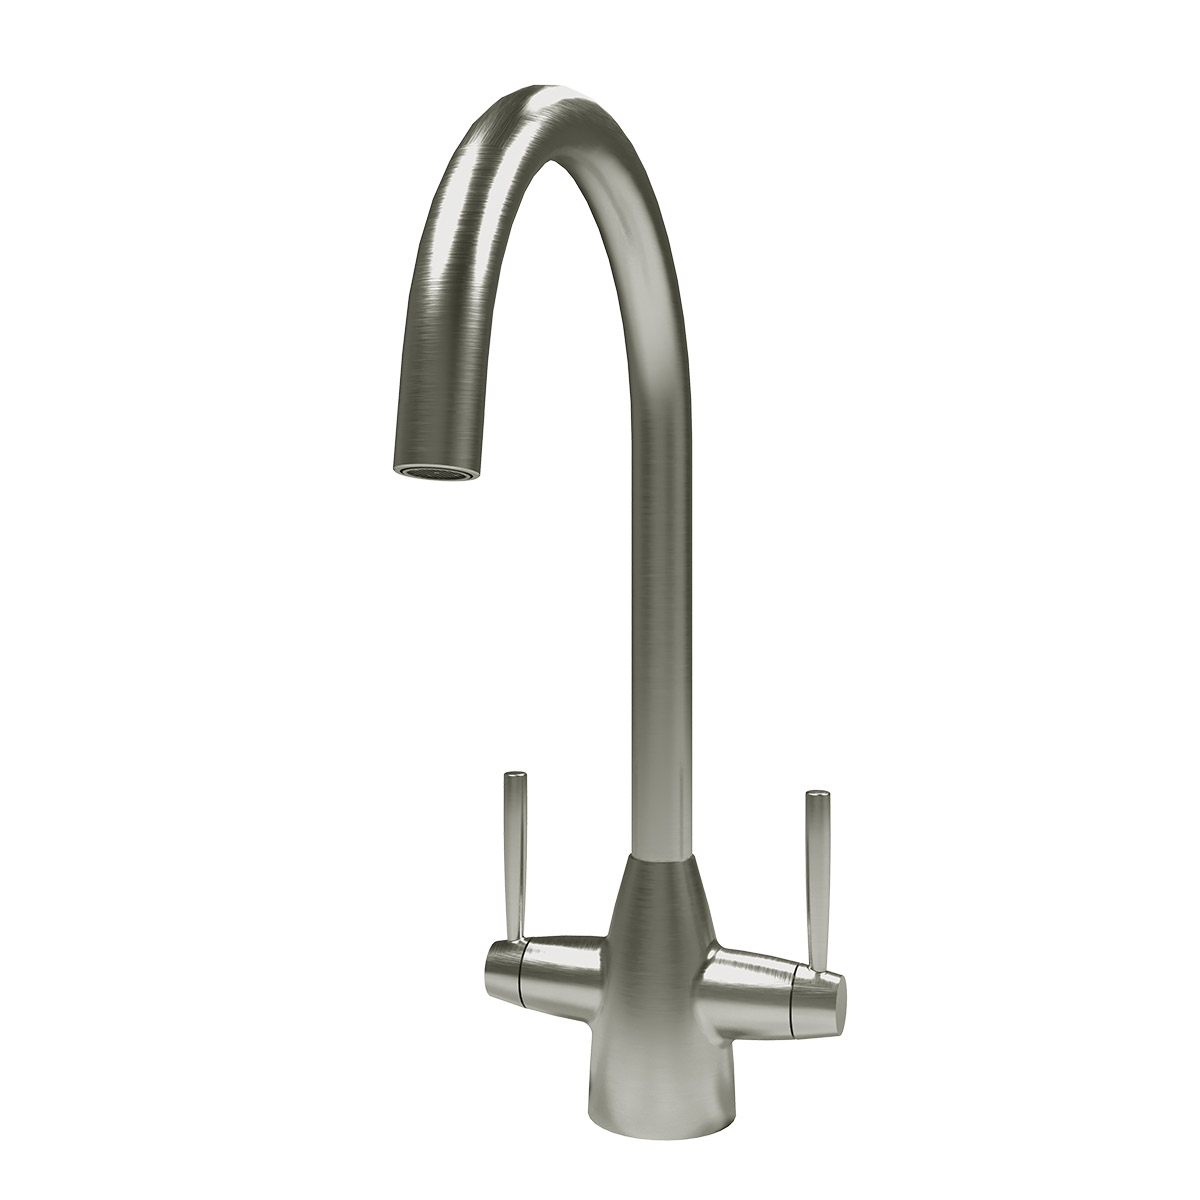 Ivy dual lever kitchen tap in brushed chrome